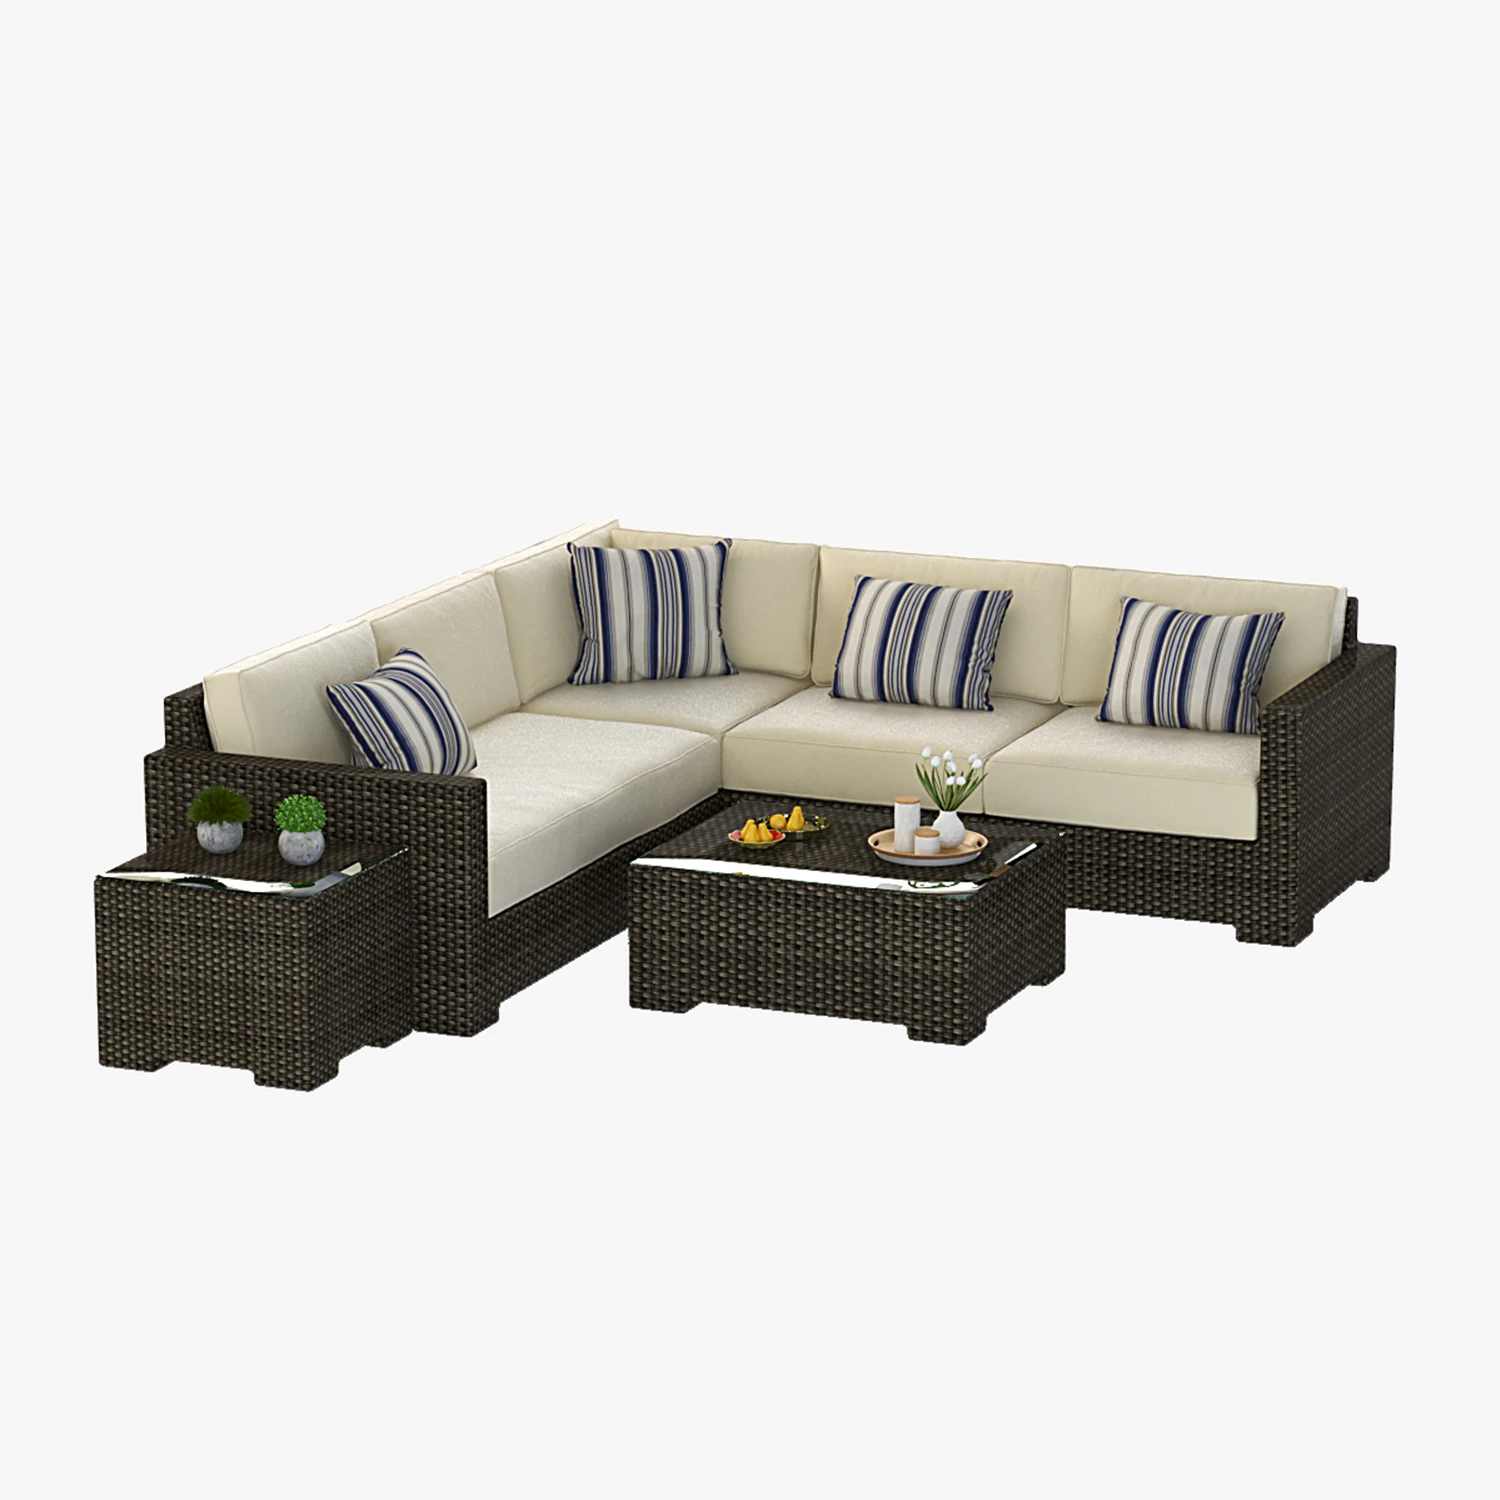 Crate and Barrel Sofa Collection 01 3D Model_07